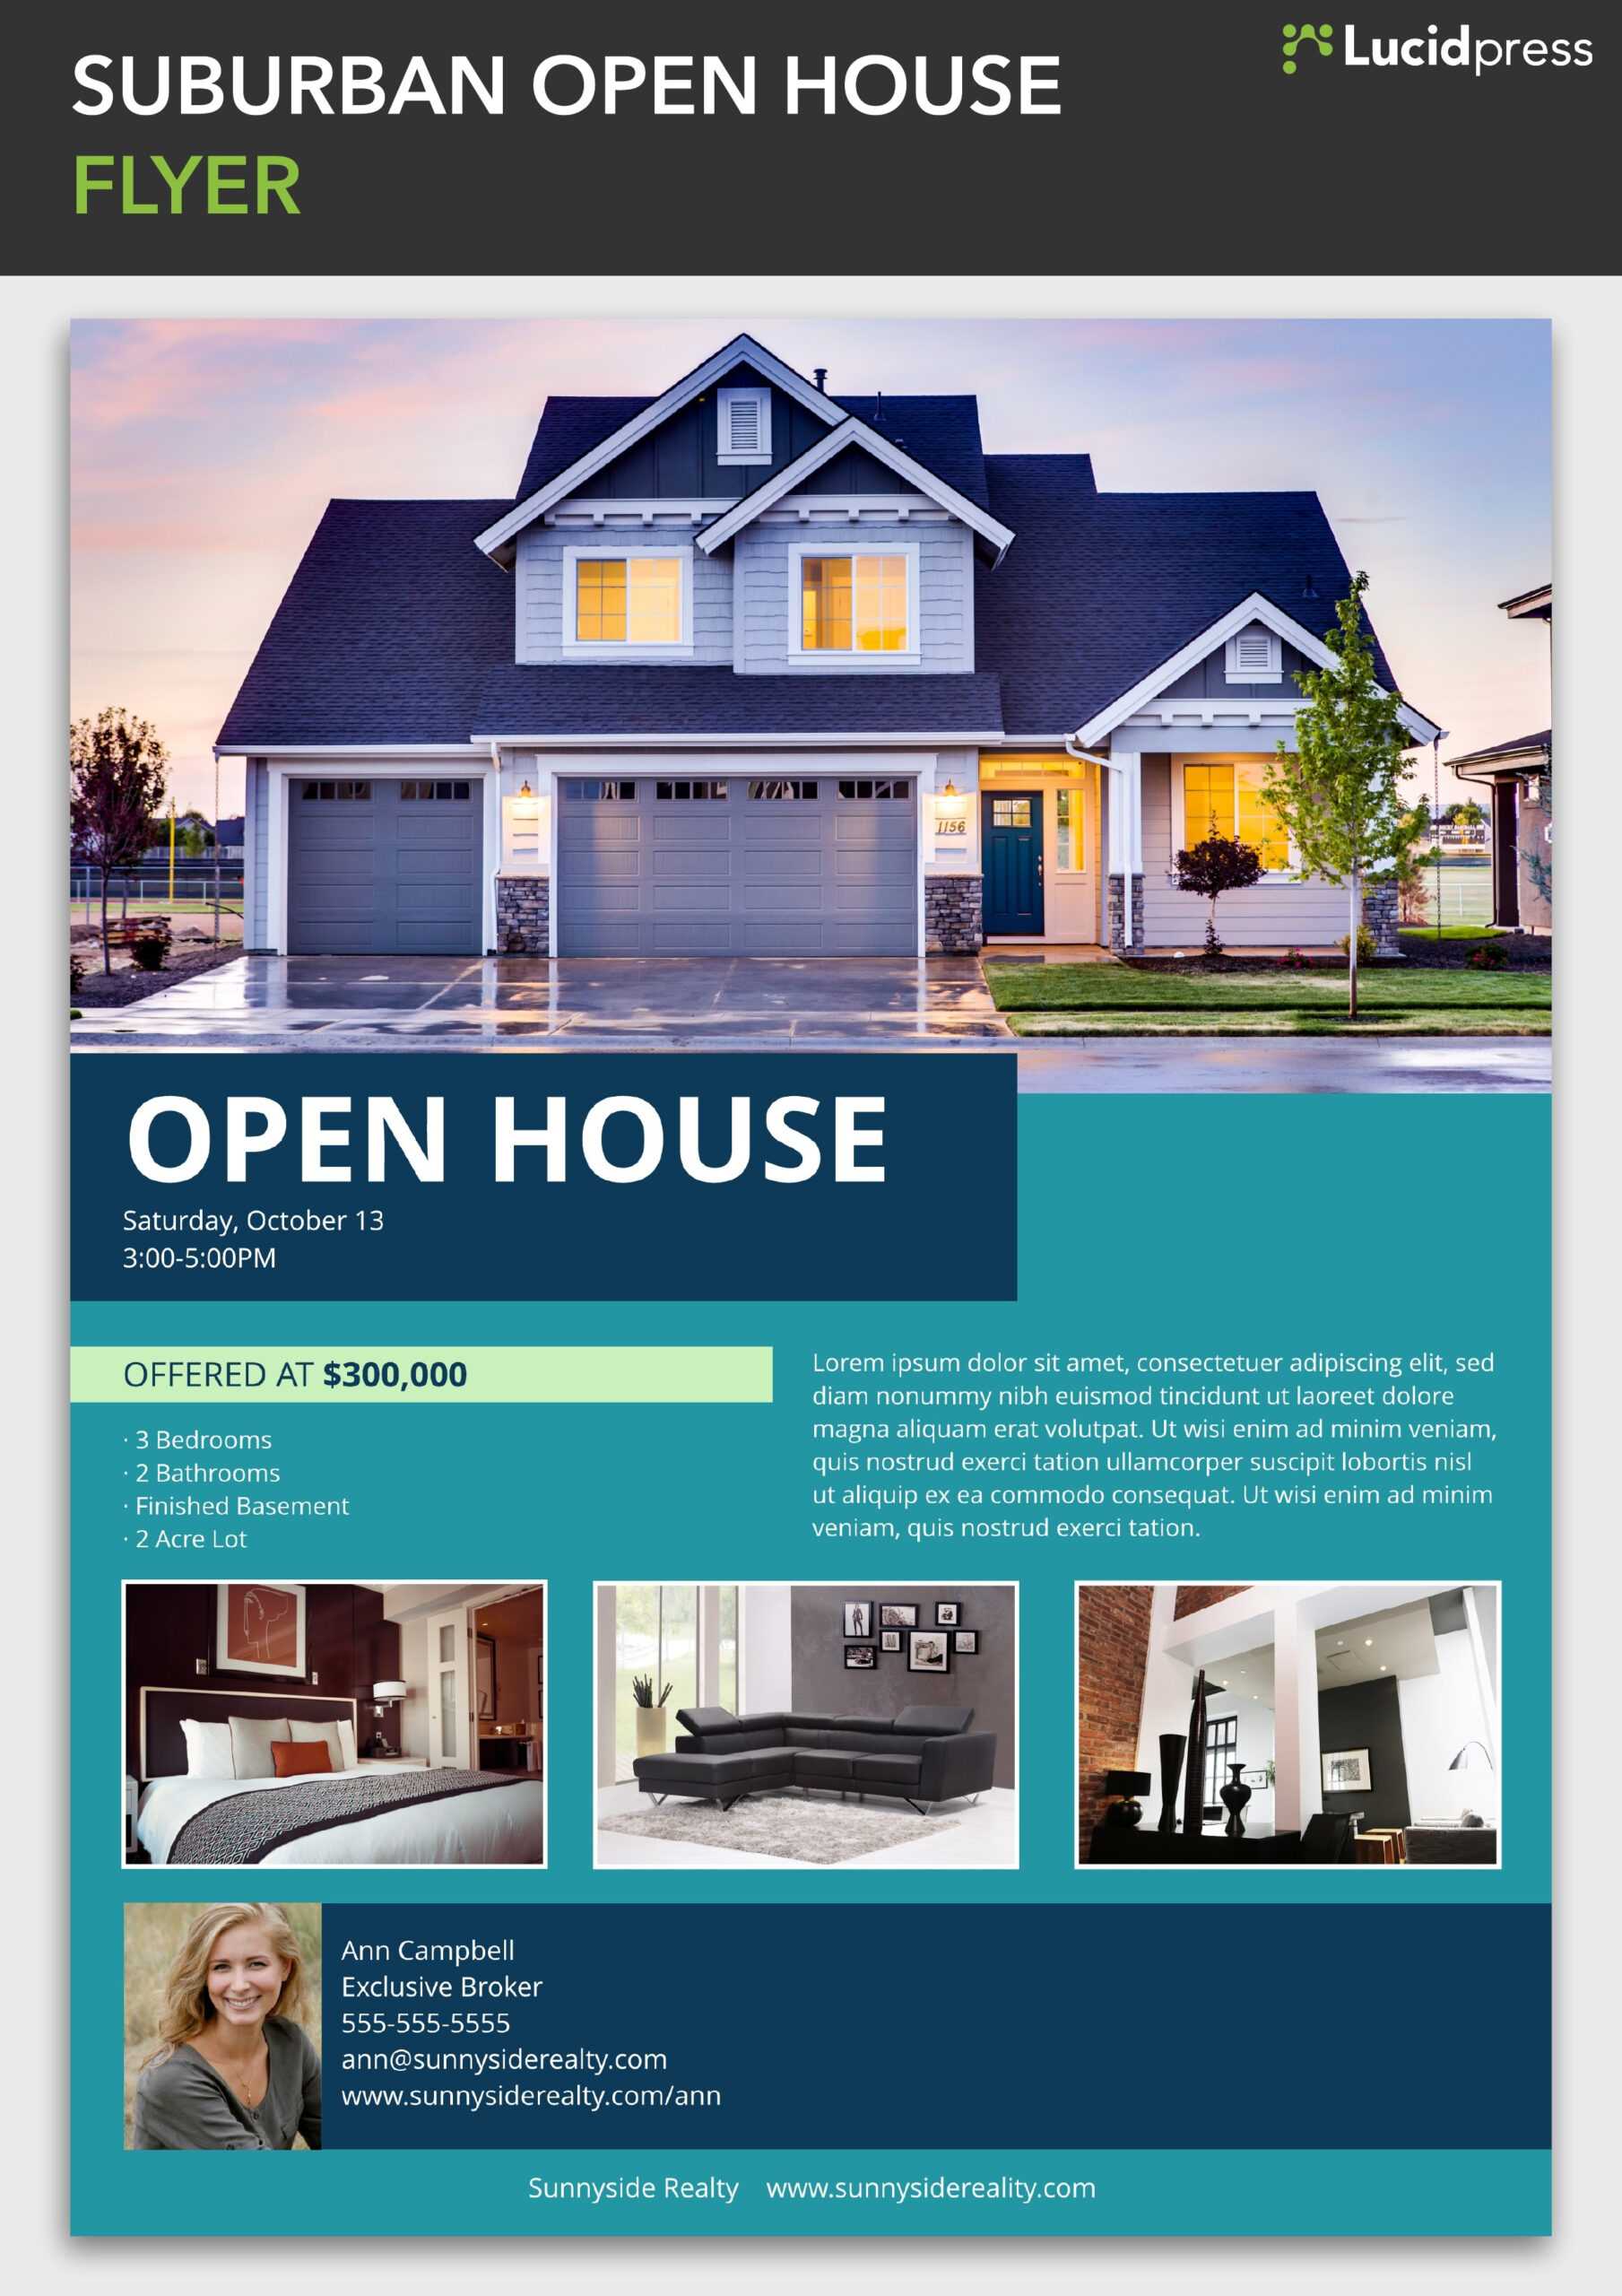 Flyer House Colona rsd7 For For Sale By Owner Flyer Template Best